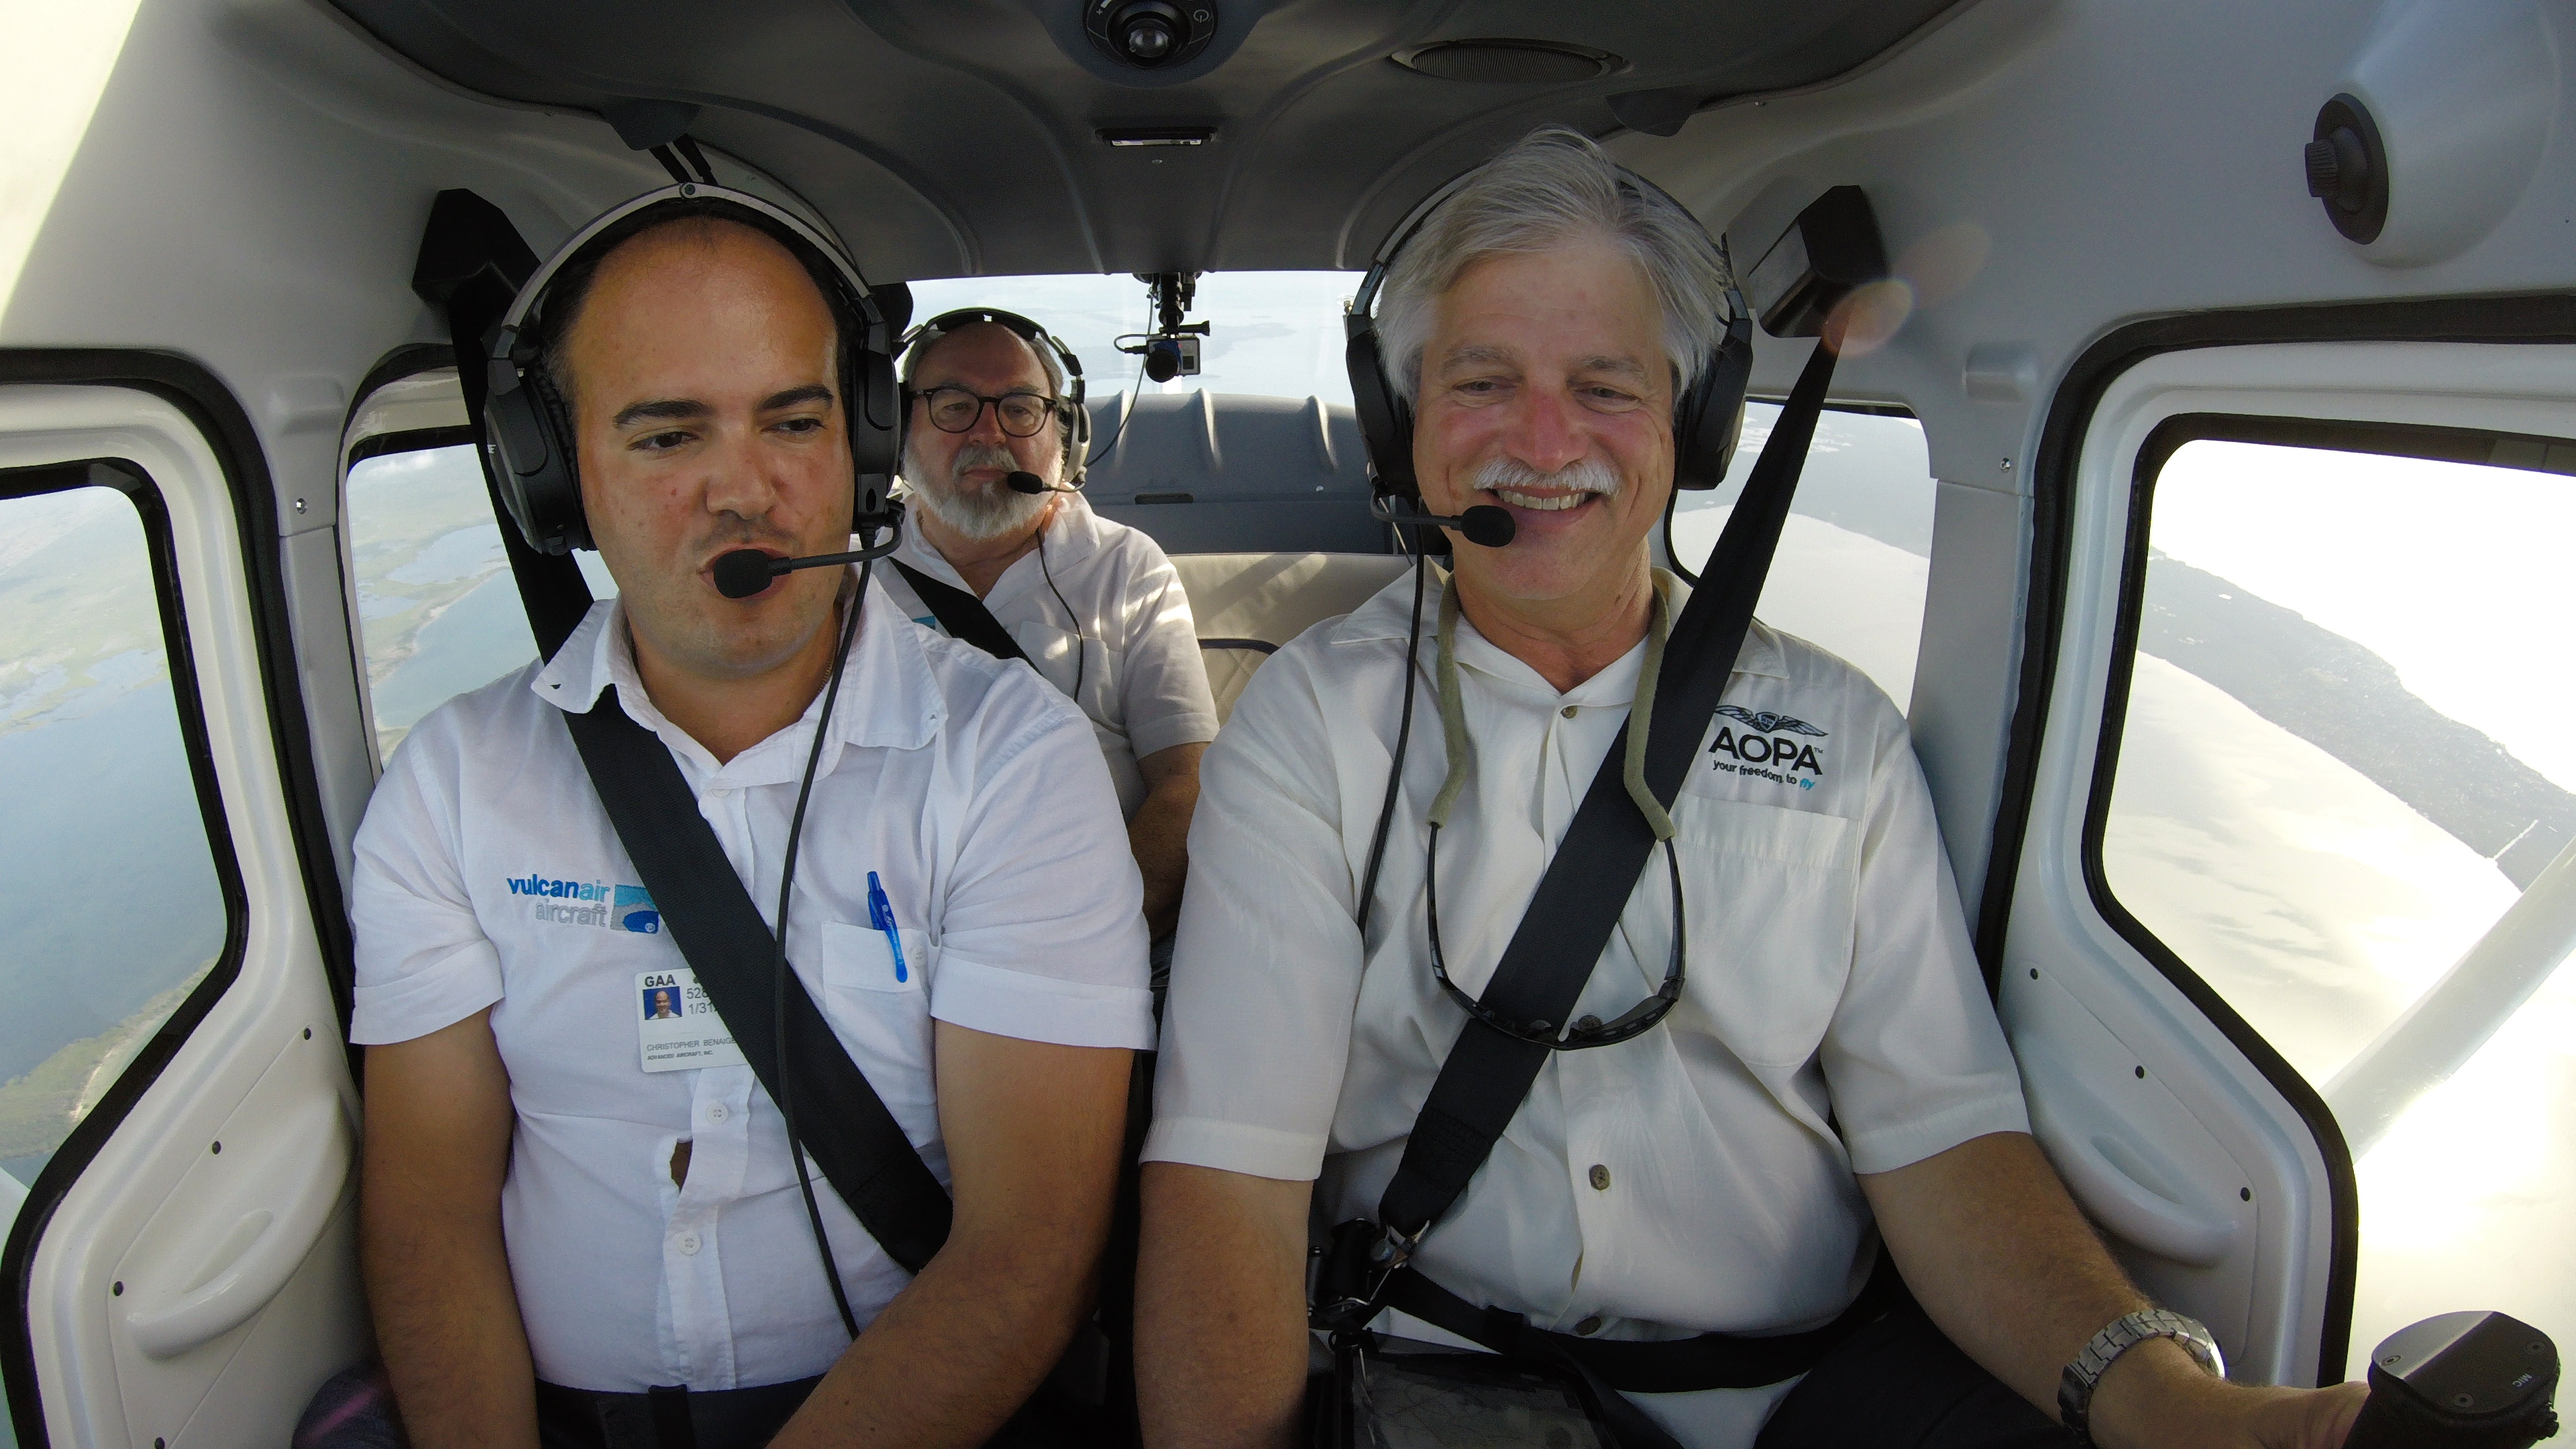 Ameravia's Chris Benaiges and Mike McMann, with AOPA editor David Tulis, fly the 2018 Vulcanair V1.0 four-seat, single-engine, high-wing aircraft to the Florida Keys, Aug. 12, 2018. Photo by David Tulis